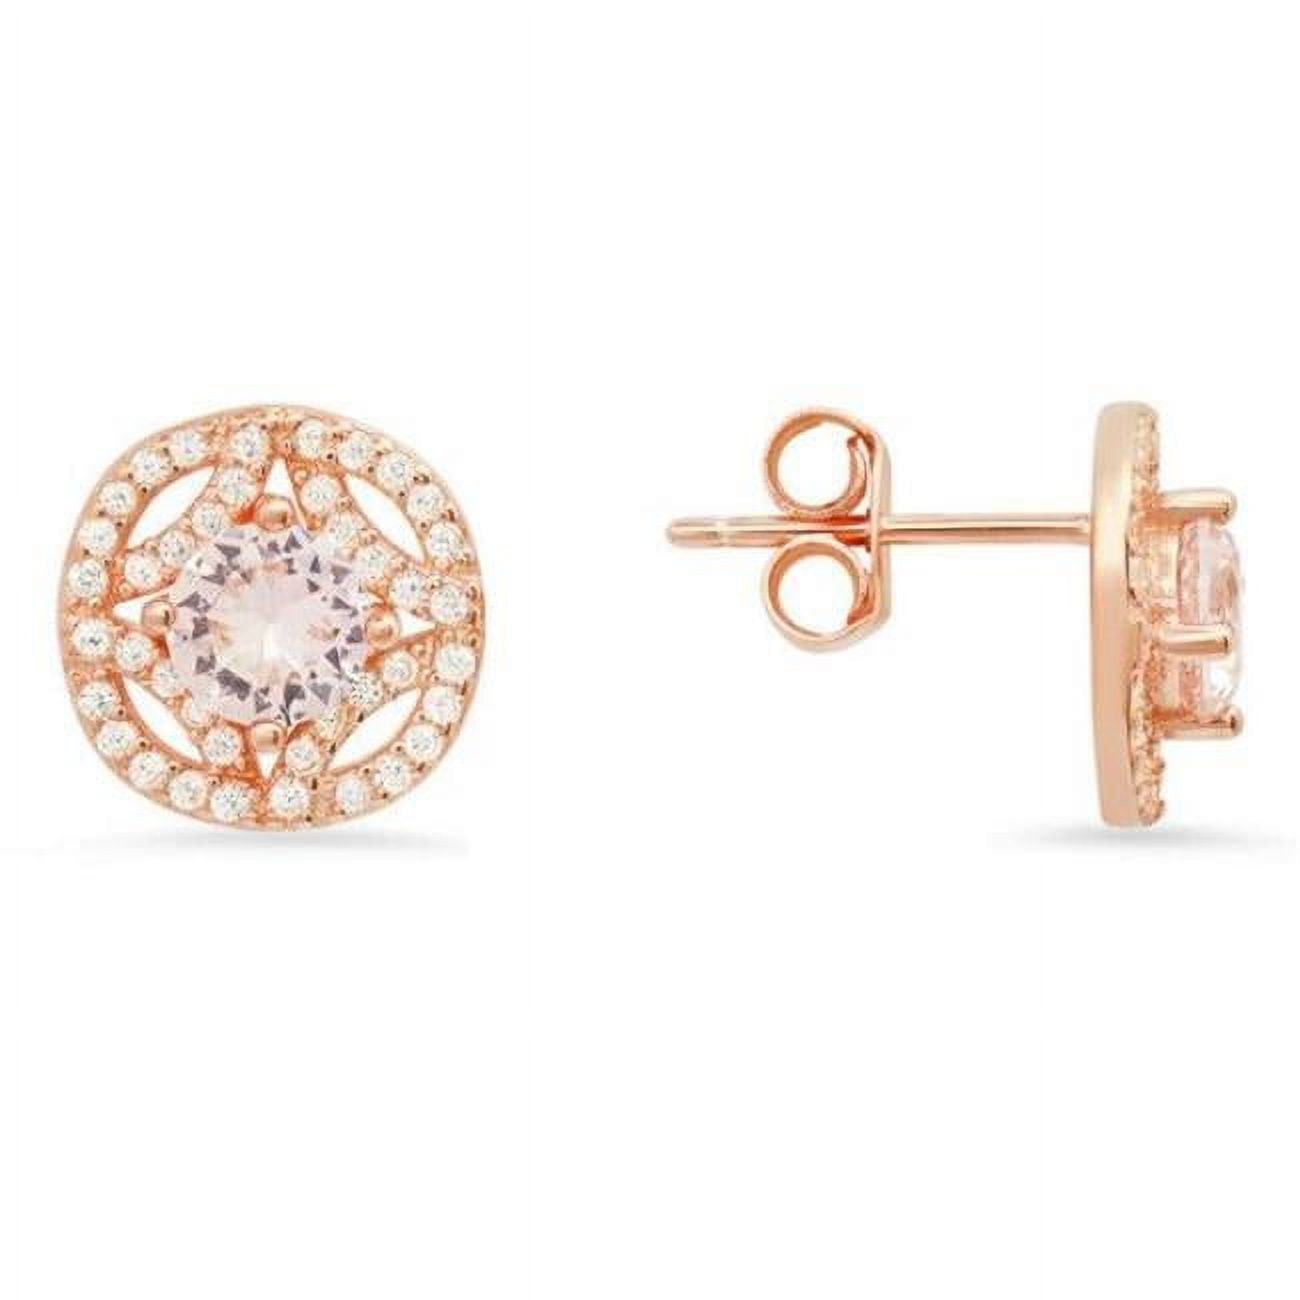 Picture of 212 Main 04-041R-DSE Womens 14K Rose Gold Over Silver Vintage Halo Morganite Cubic Zirconia Stud Earrings